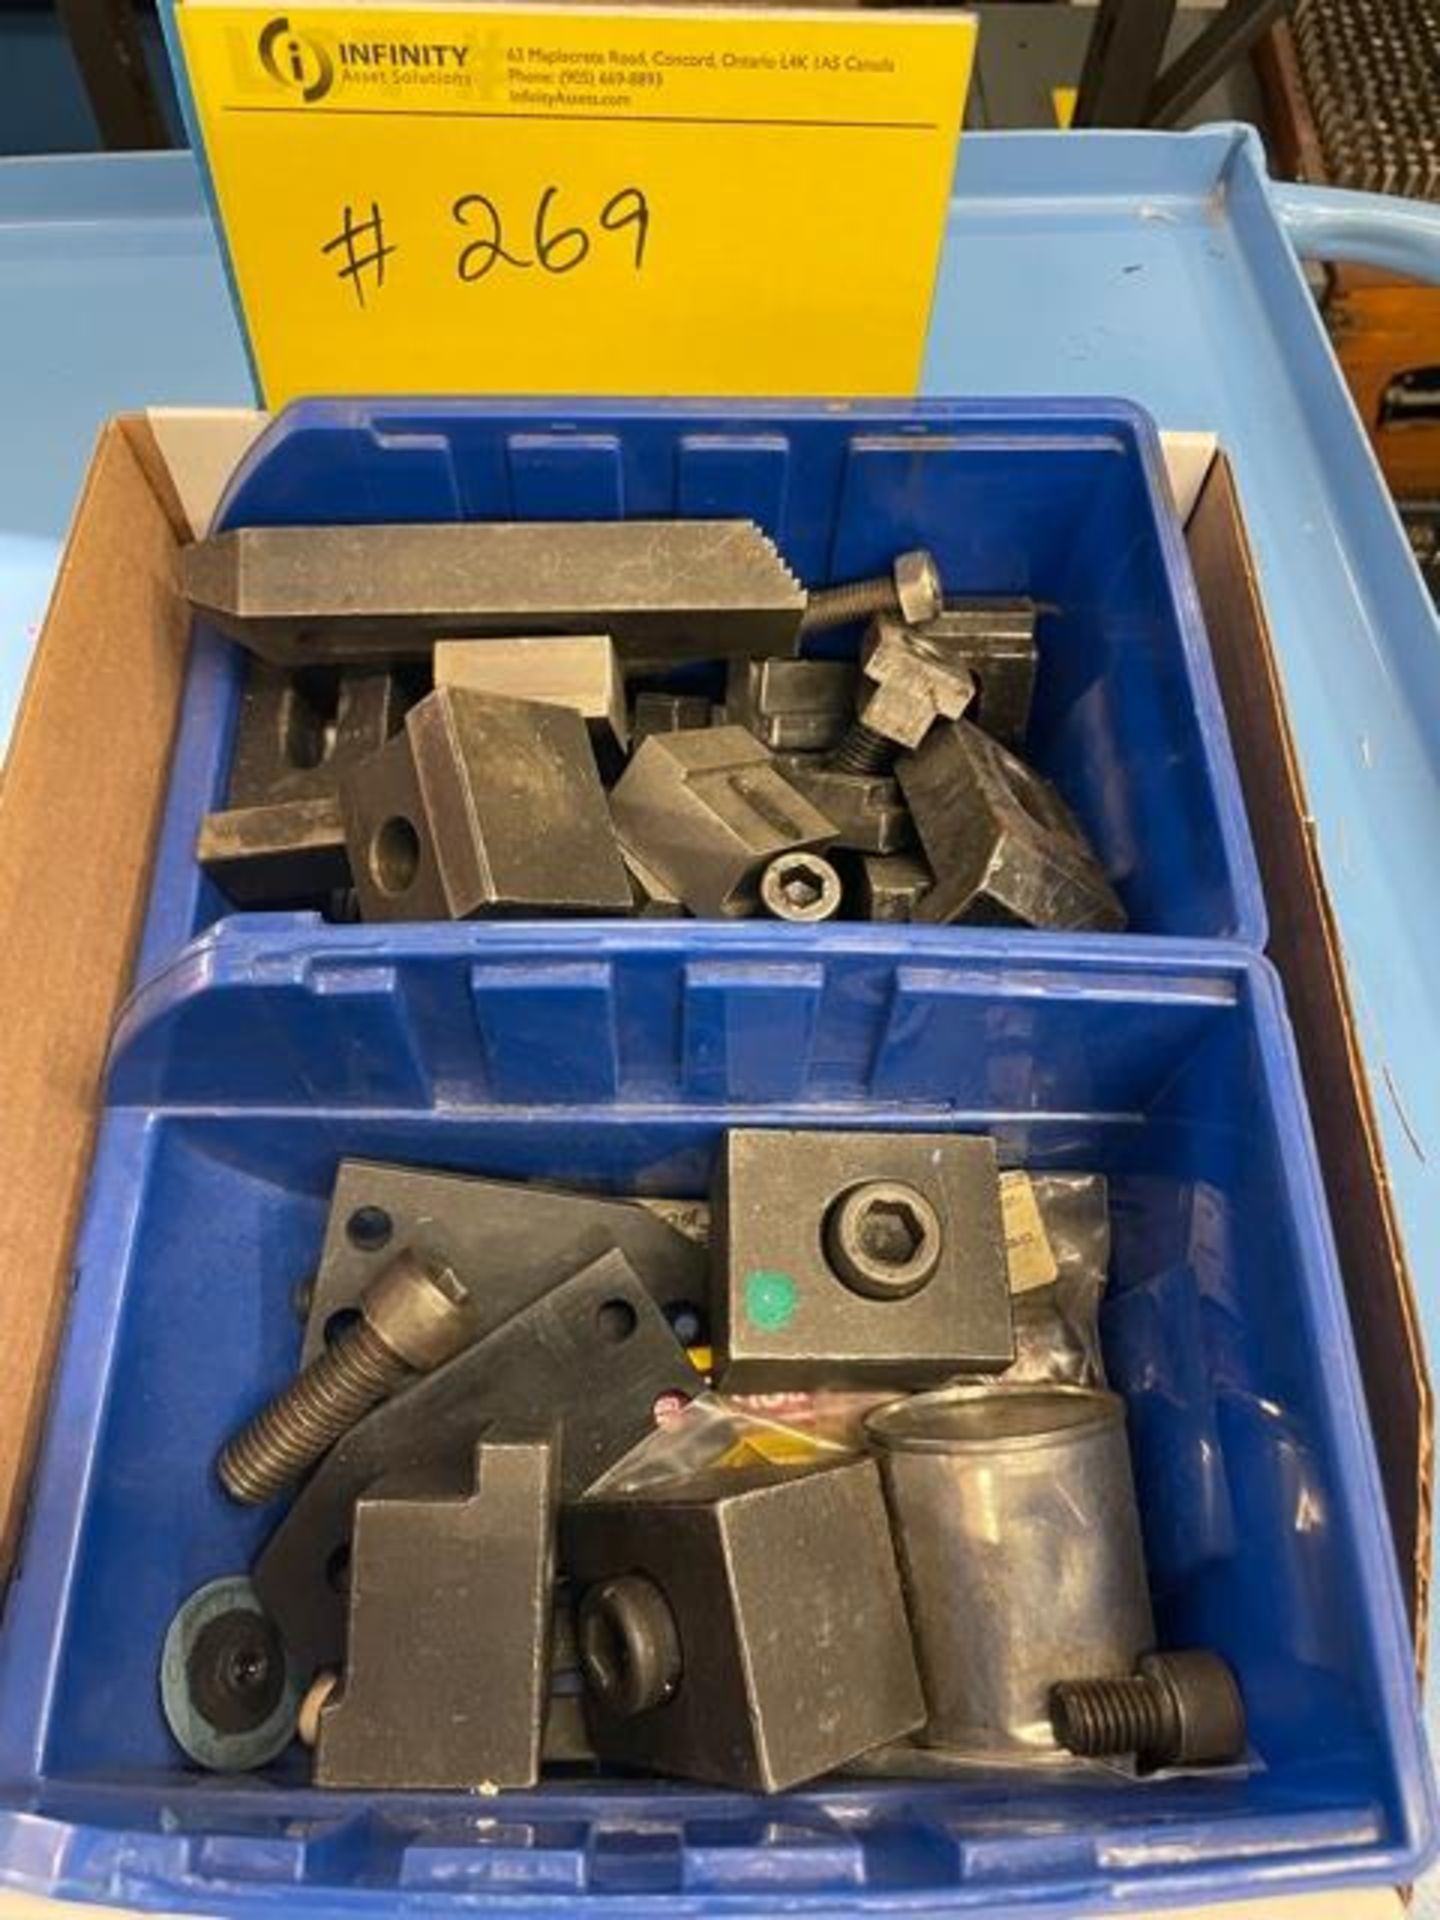 Vise clamps, nuts and bolts